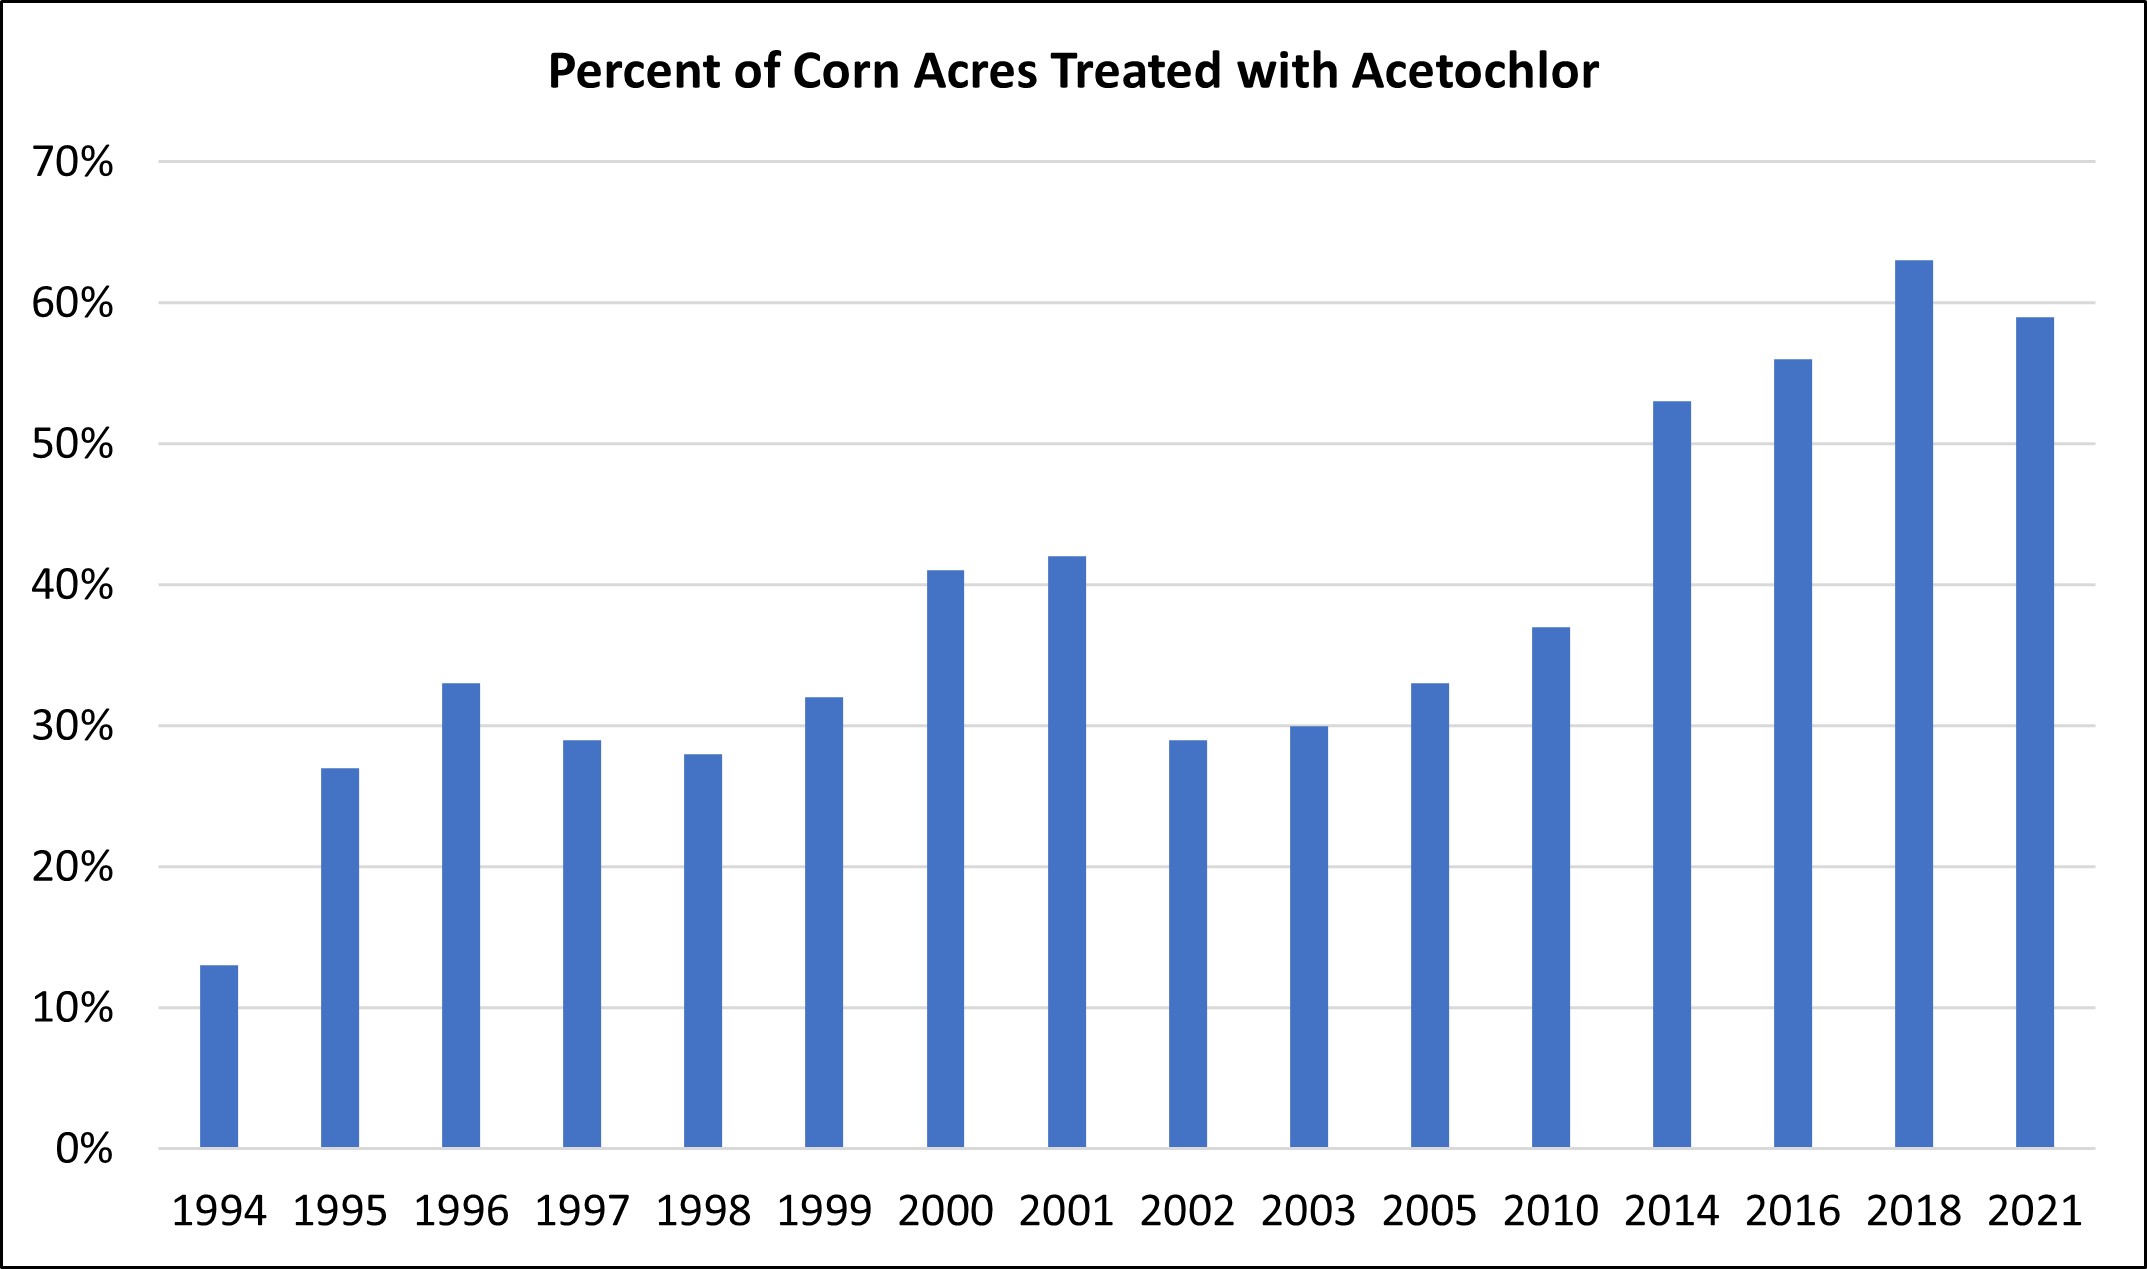 Bar graph showing percent of corn acres treated with acetochlor from 1994-2021. Percentages varied between 13% and 58% on corn acres from 1994 through 2021 according to the National Agricultural Statistics Service.